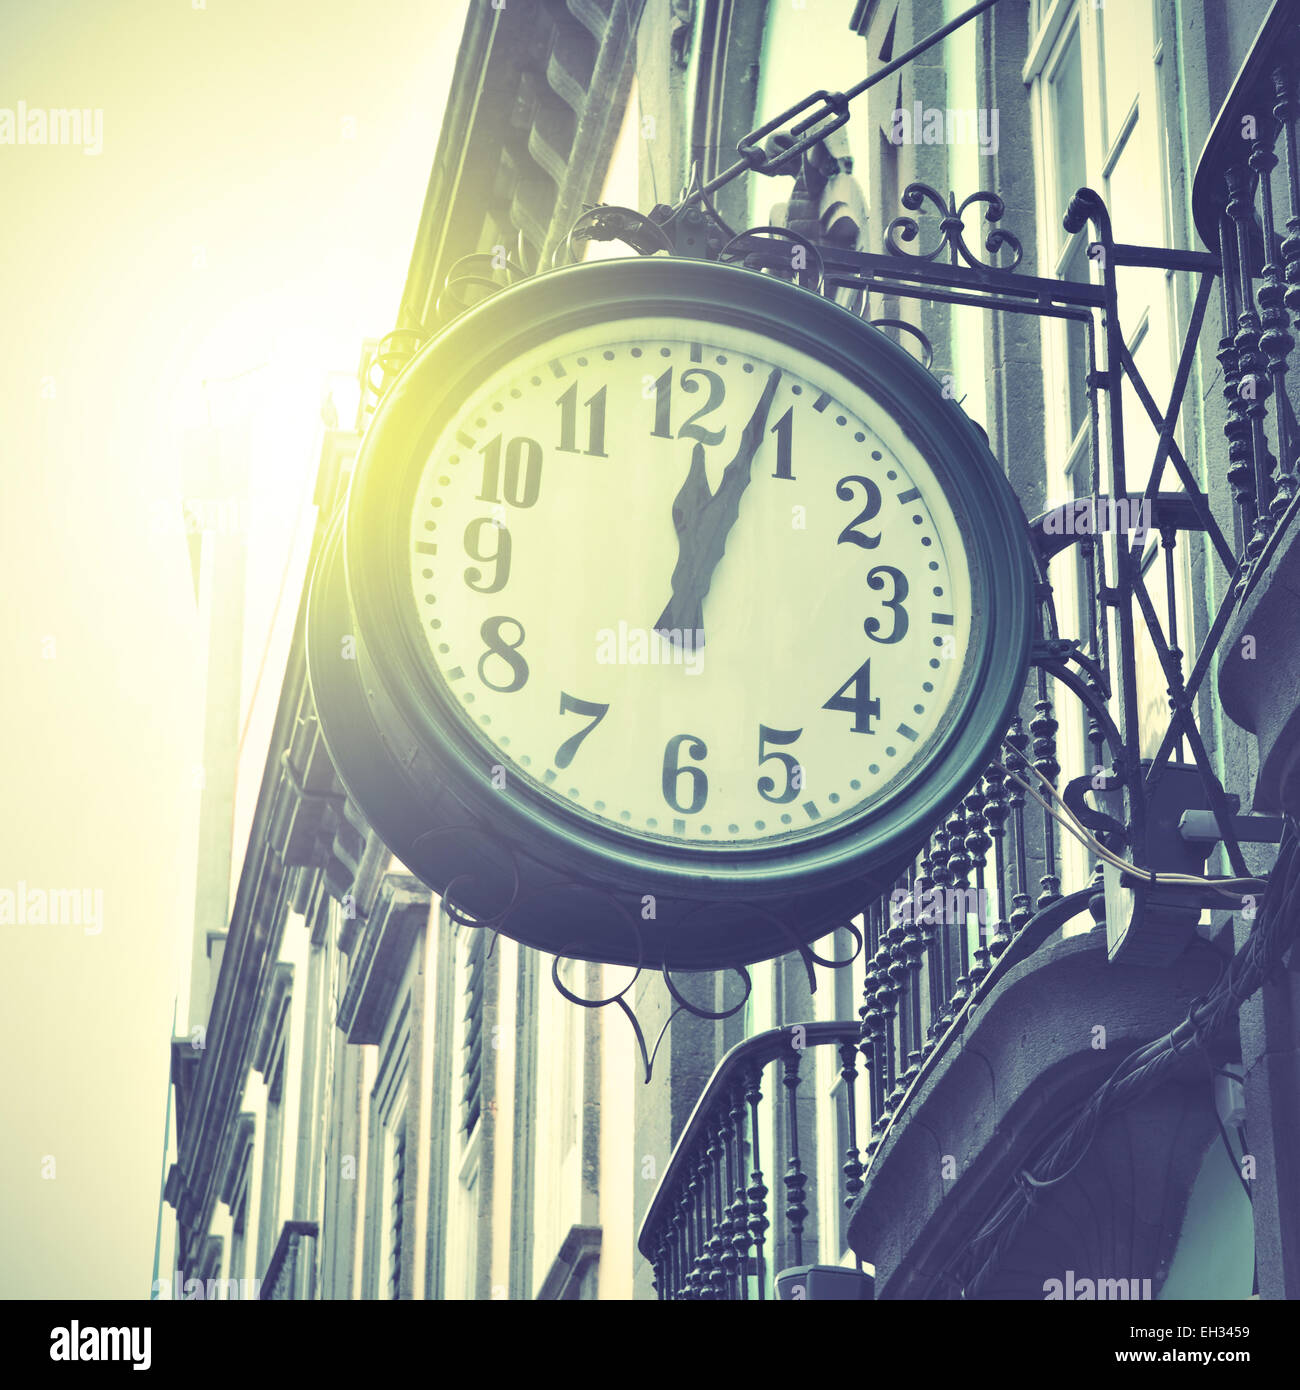 Old clock at railway station. Retro style filtred image Stock Photo